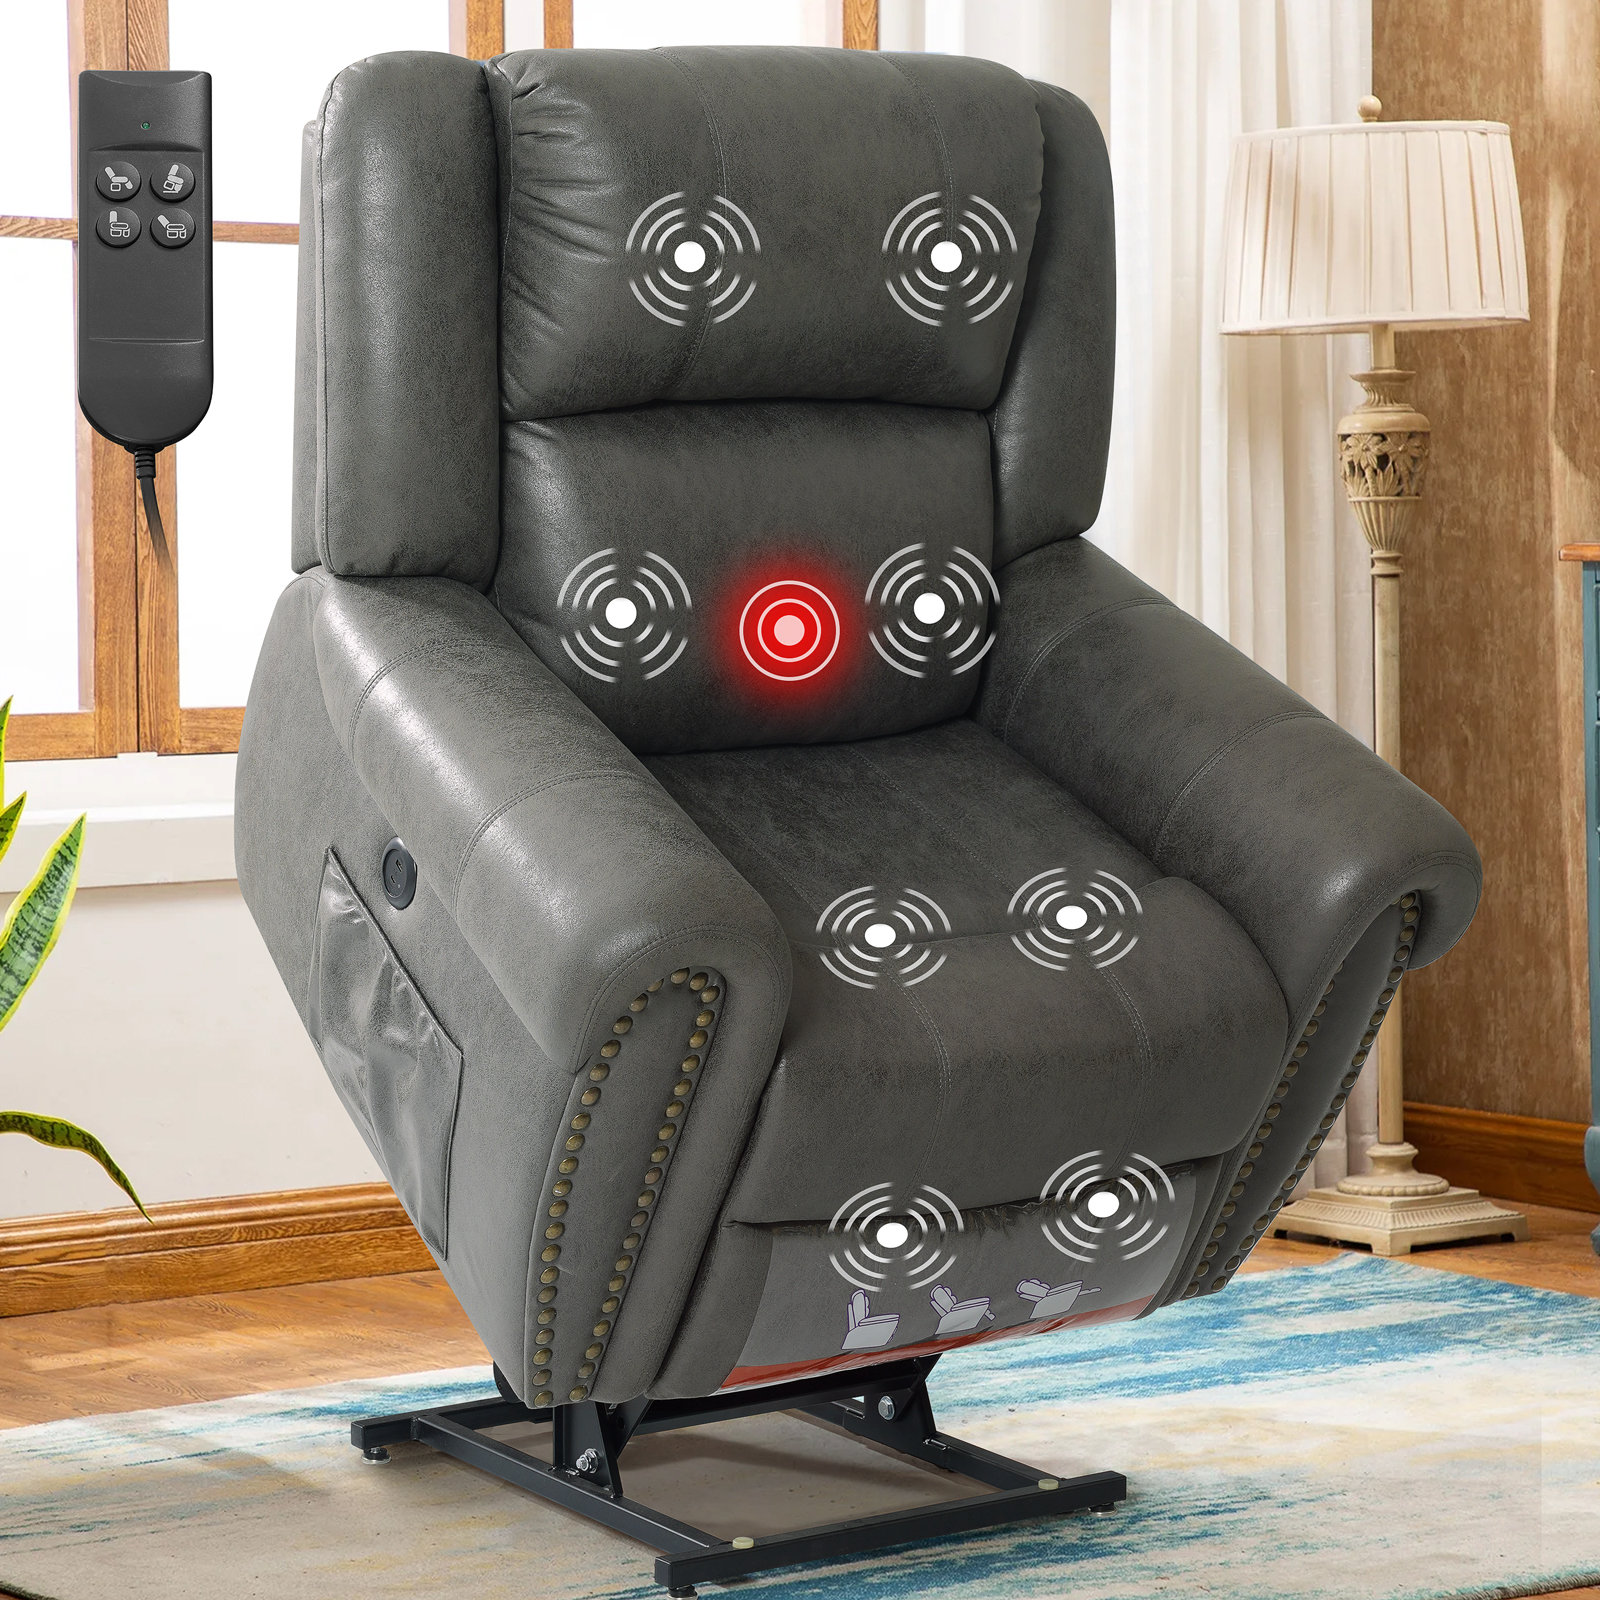 41'' Oversized Power Lift Chair - Heated Massage Electric Recliner with Super Soft Padding (Set of 2) Red Barrel Studio Body Fabric: Gray